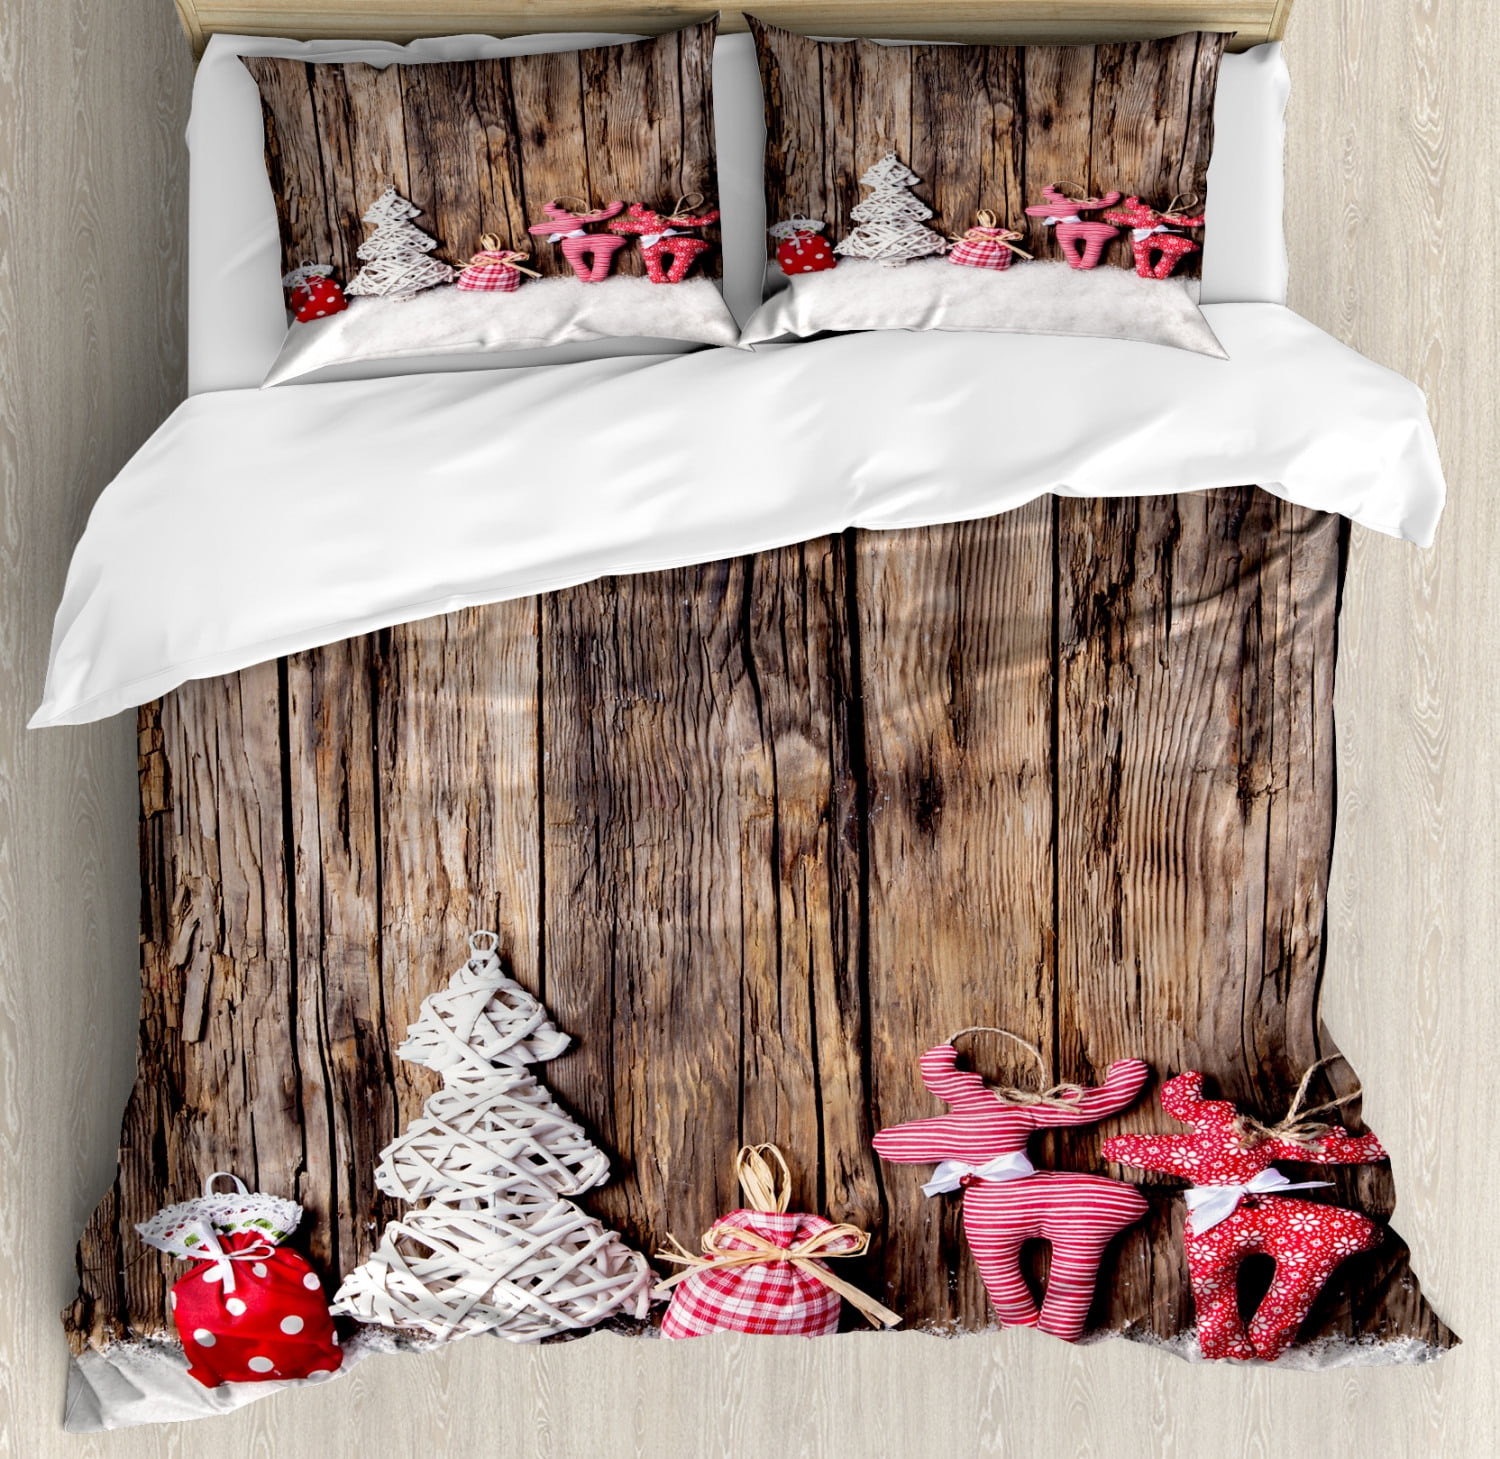 Winter Duvet Cover Set, Traditional Cute Cloth Christmas Inspired Figures Rustic Wooden Planks